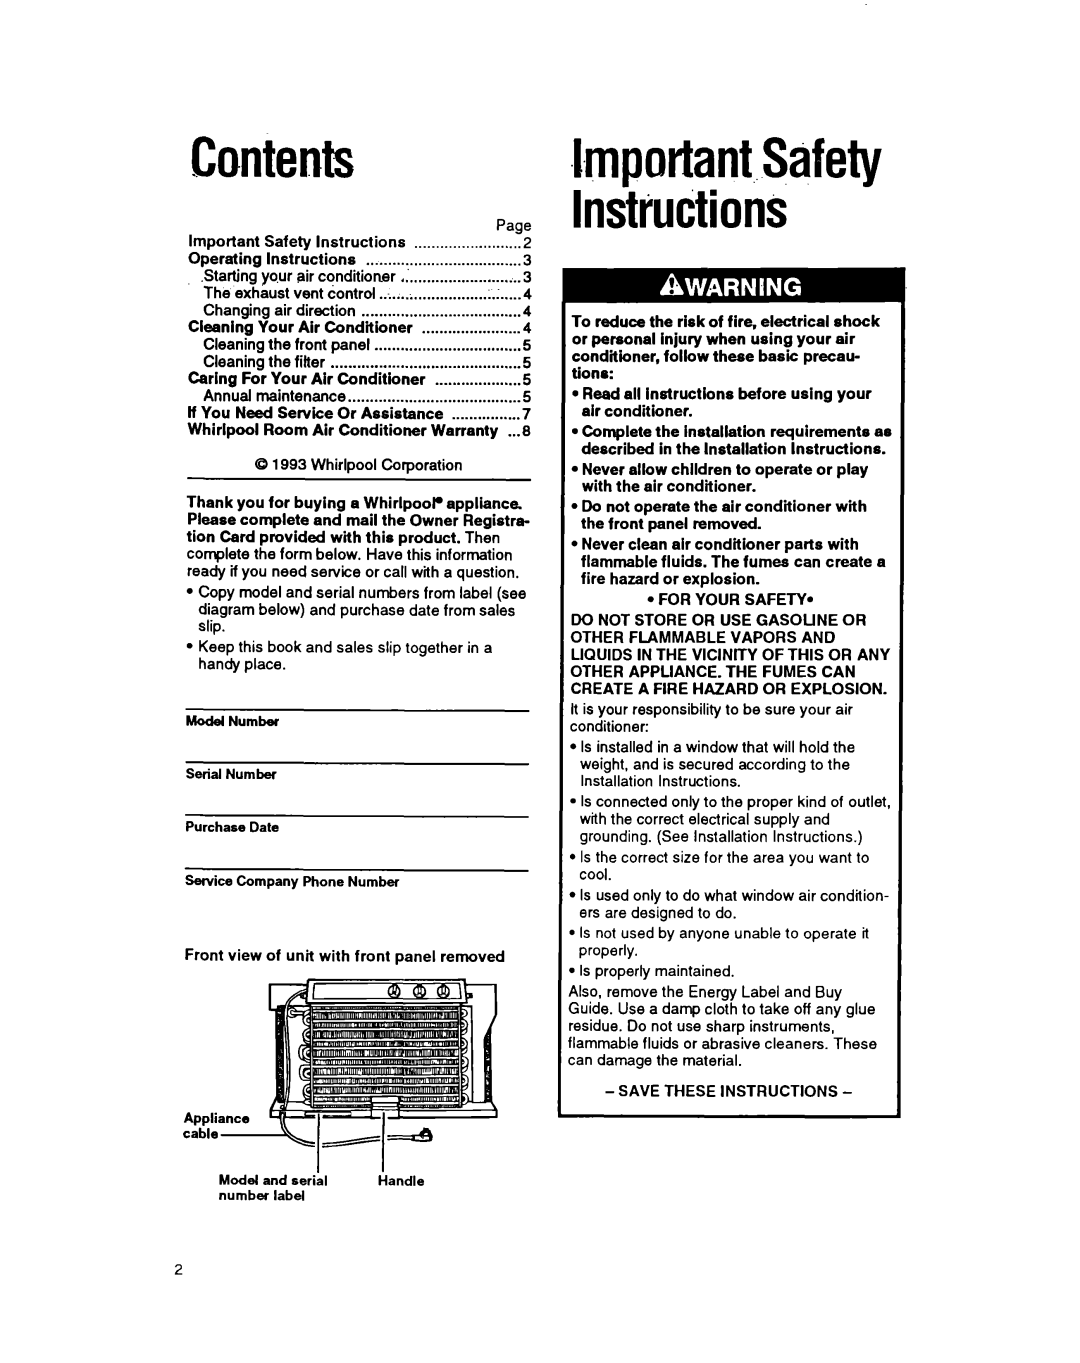 Whirlpool ACH184, ACH122, ACH082, ACH102 manual Contents, hynportant..Safety InstiuCtionS 